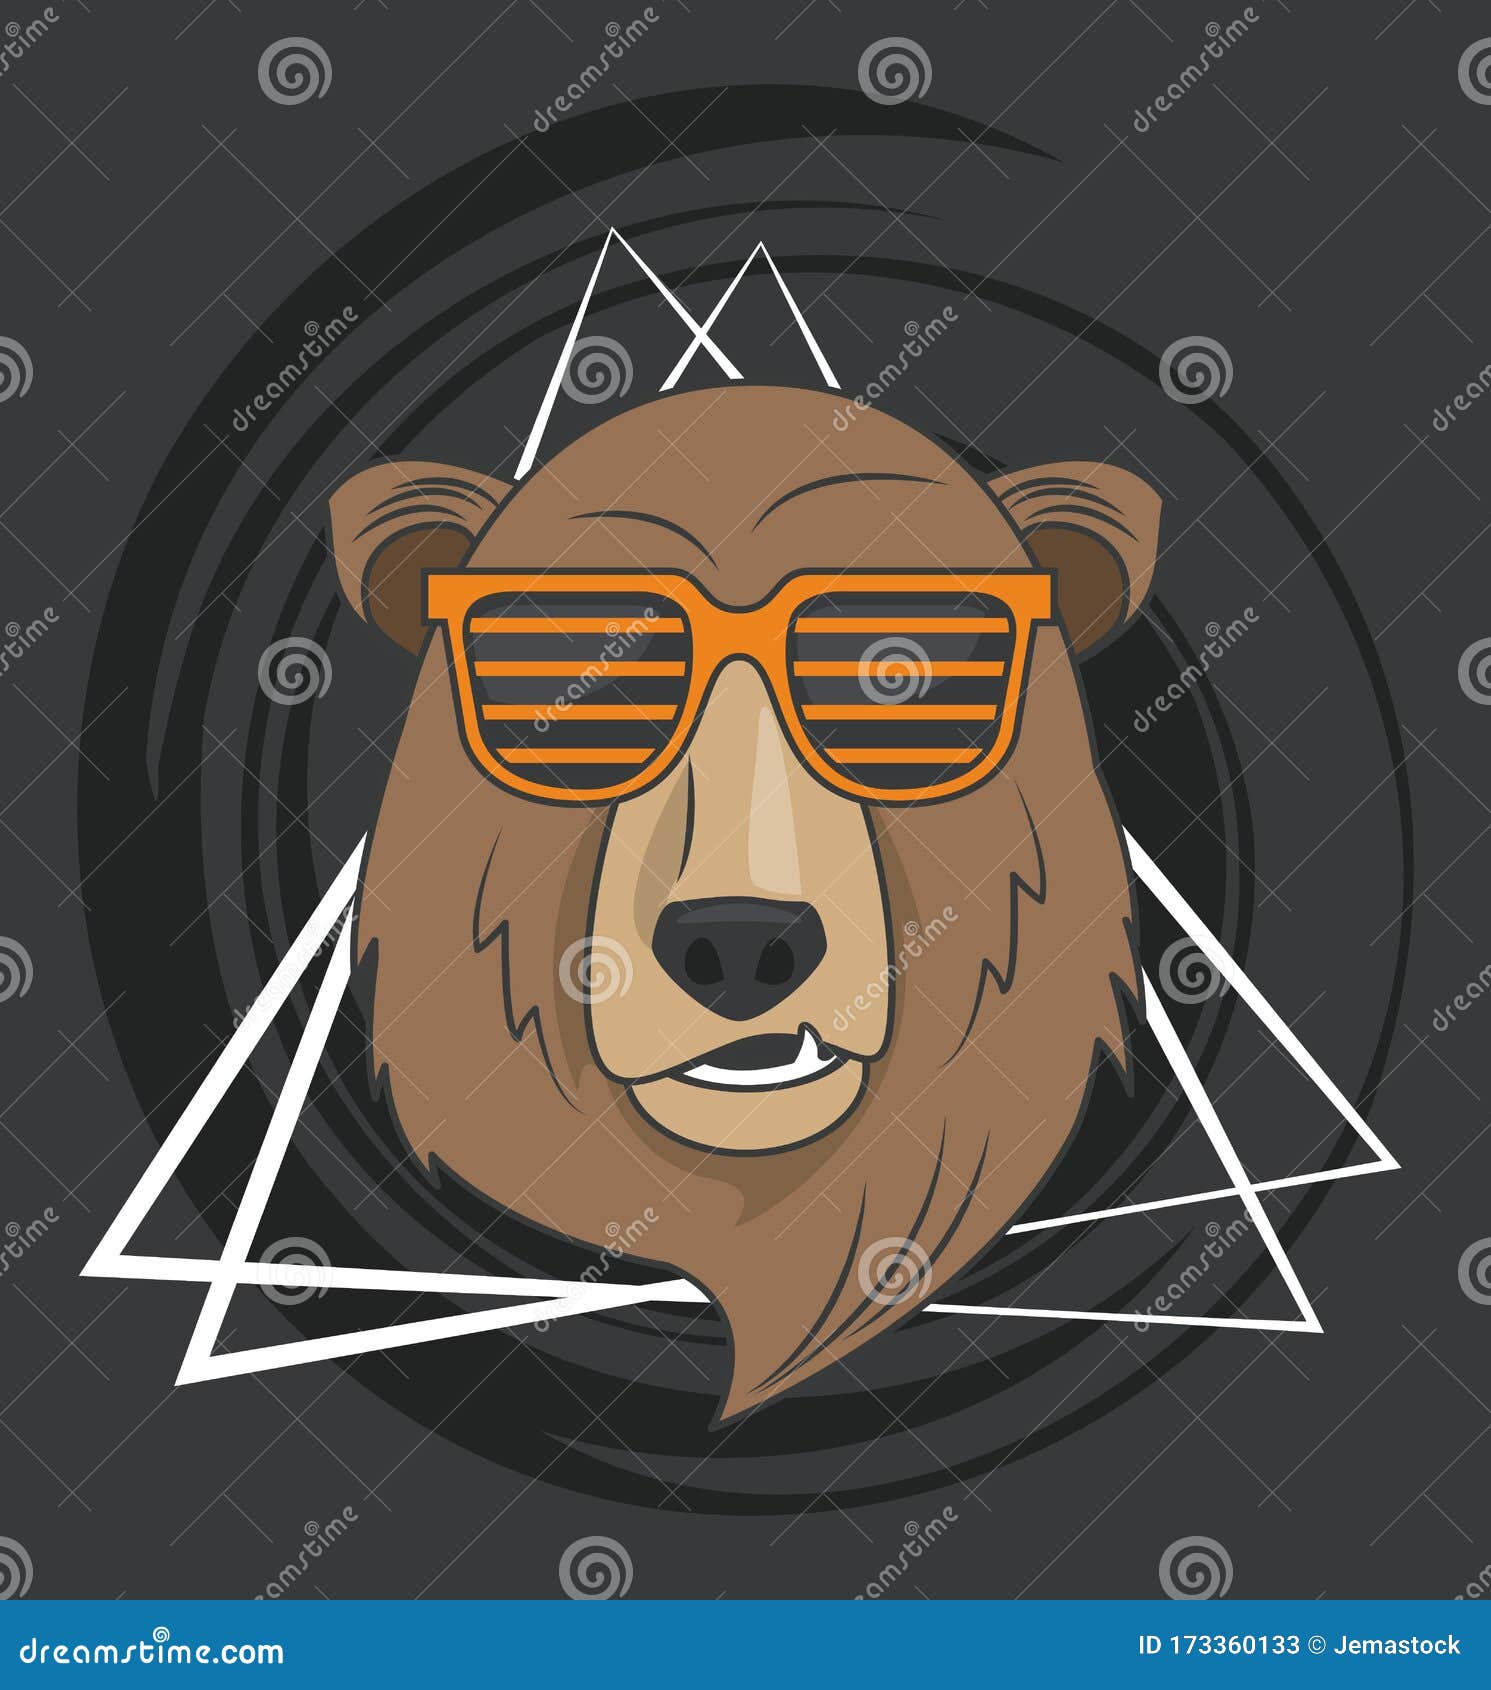 https://thumbs.dreamstime.com/z/funny-bear-grizzly-sunglasses-cool-style-vector-illustration-design-173360133.jpg